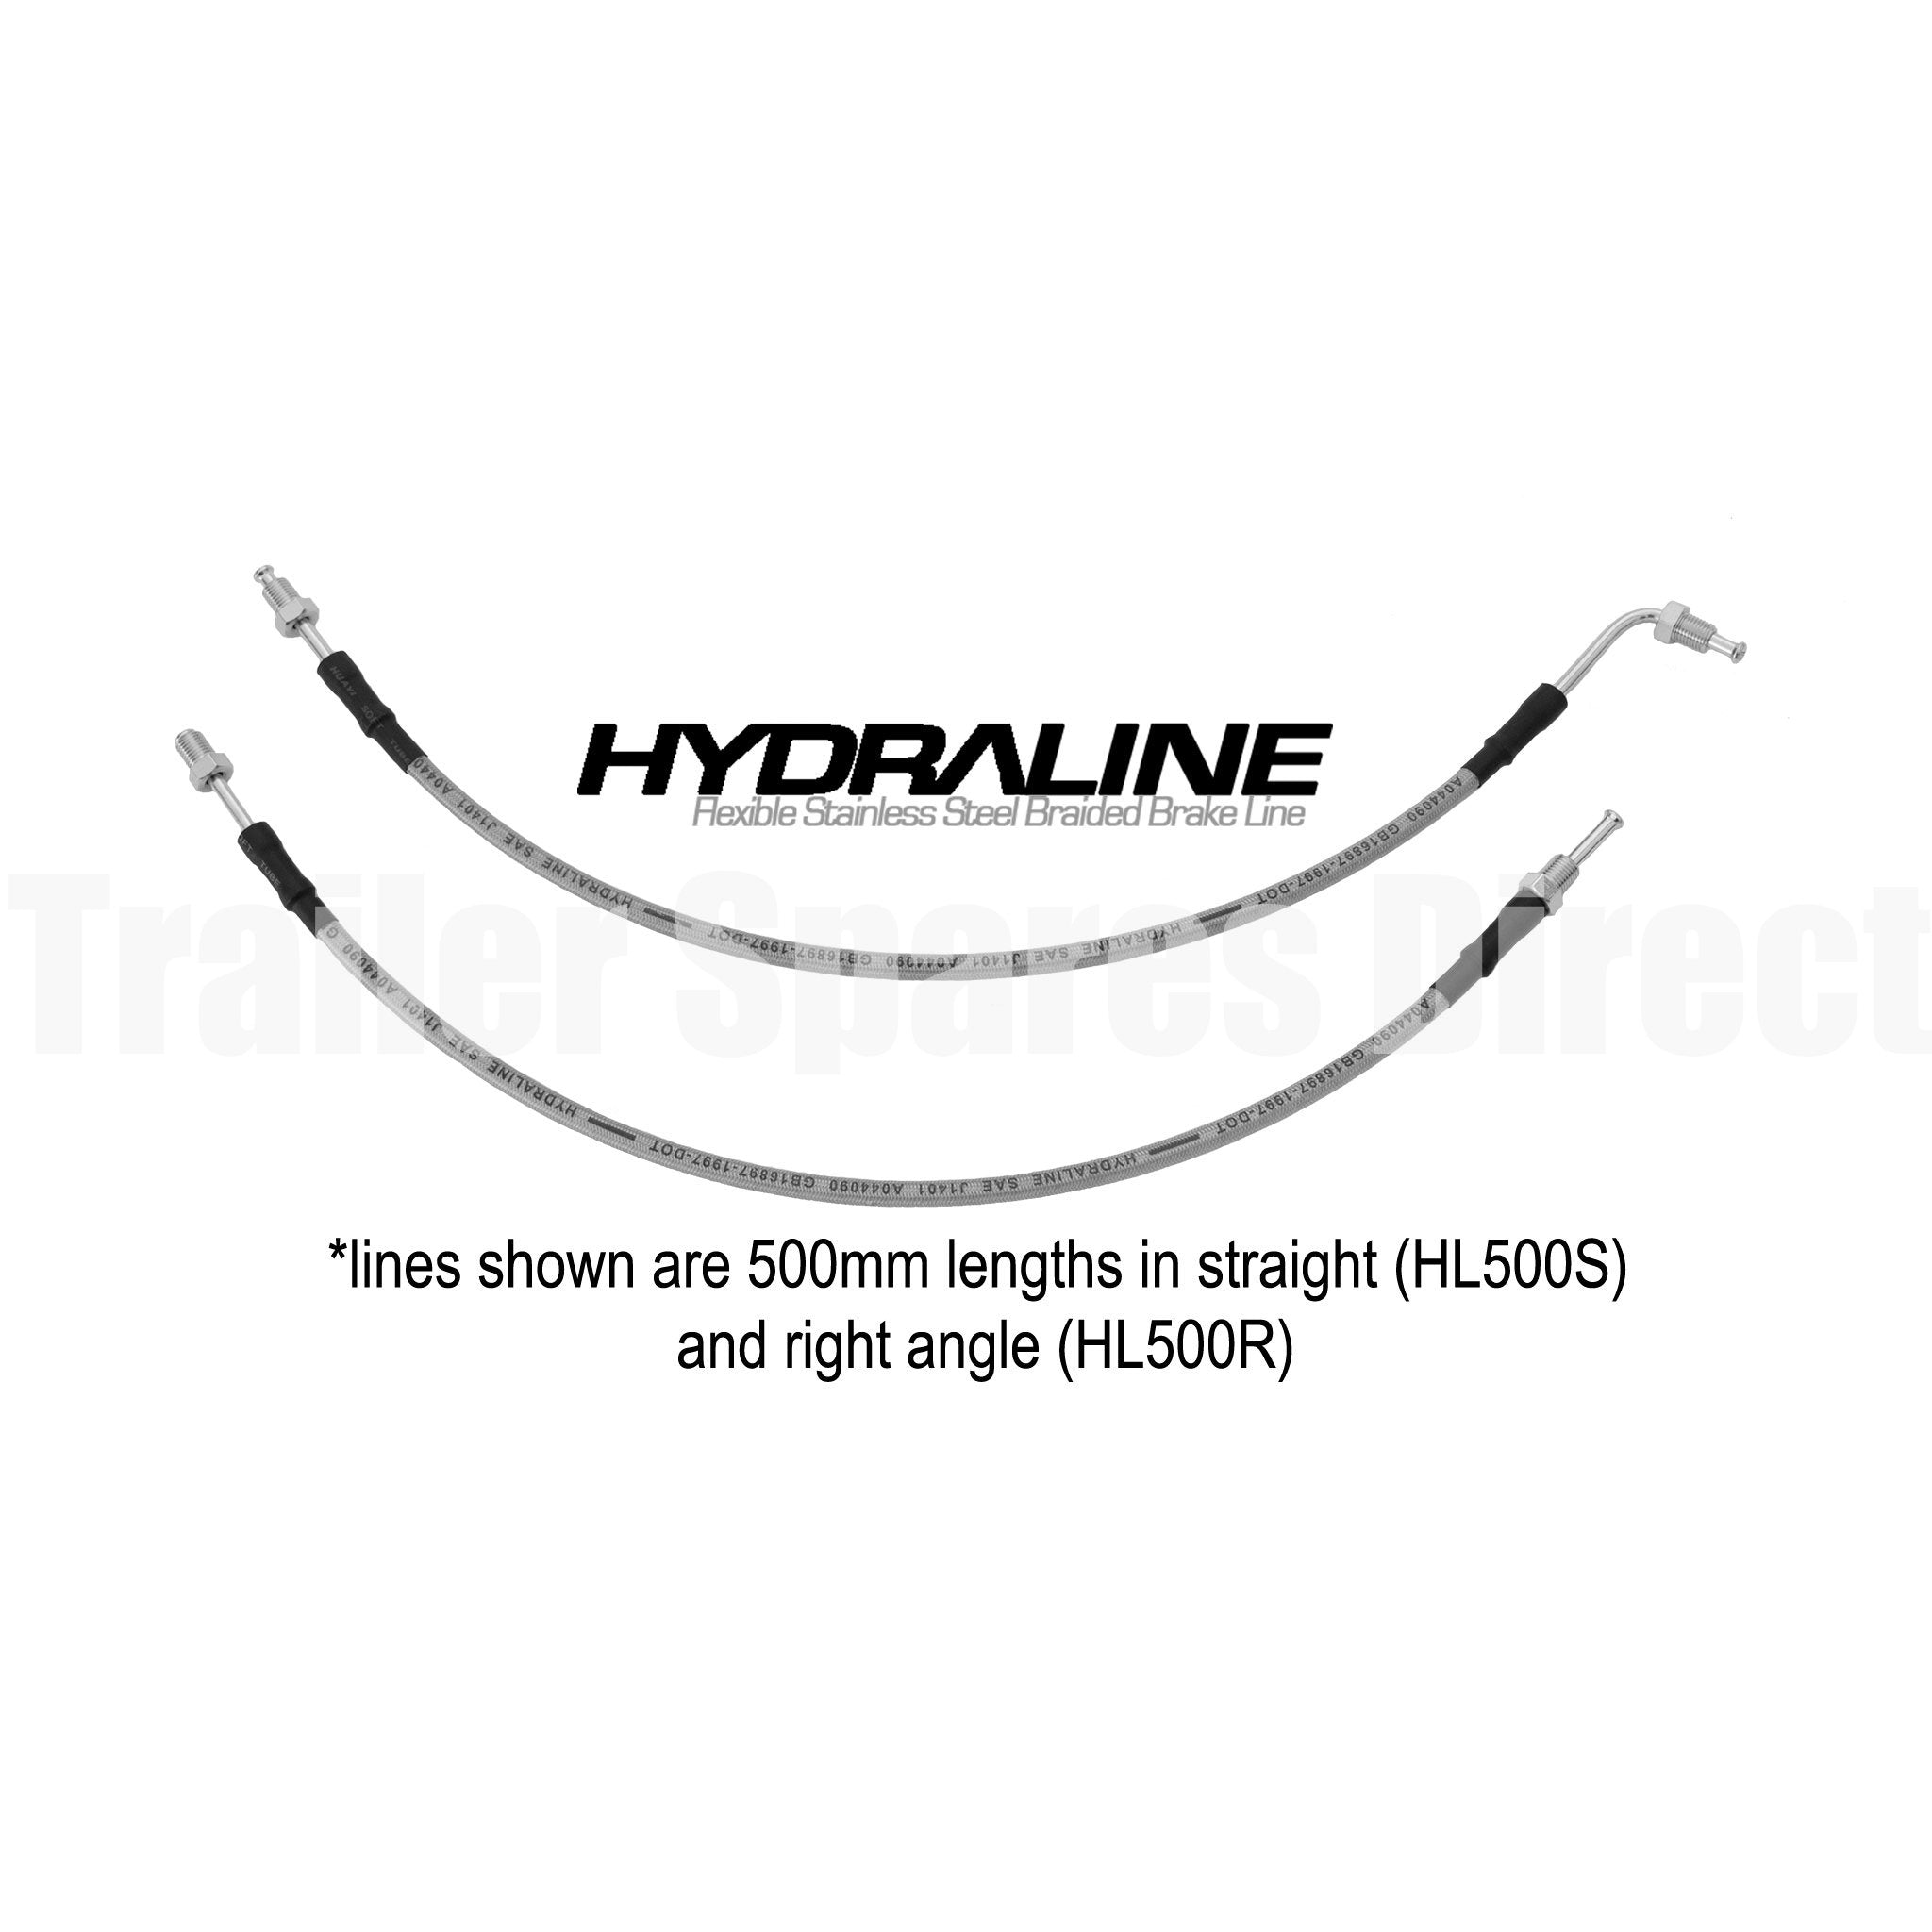 Single axle HydraLine kit with 5500mm lead line